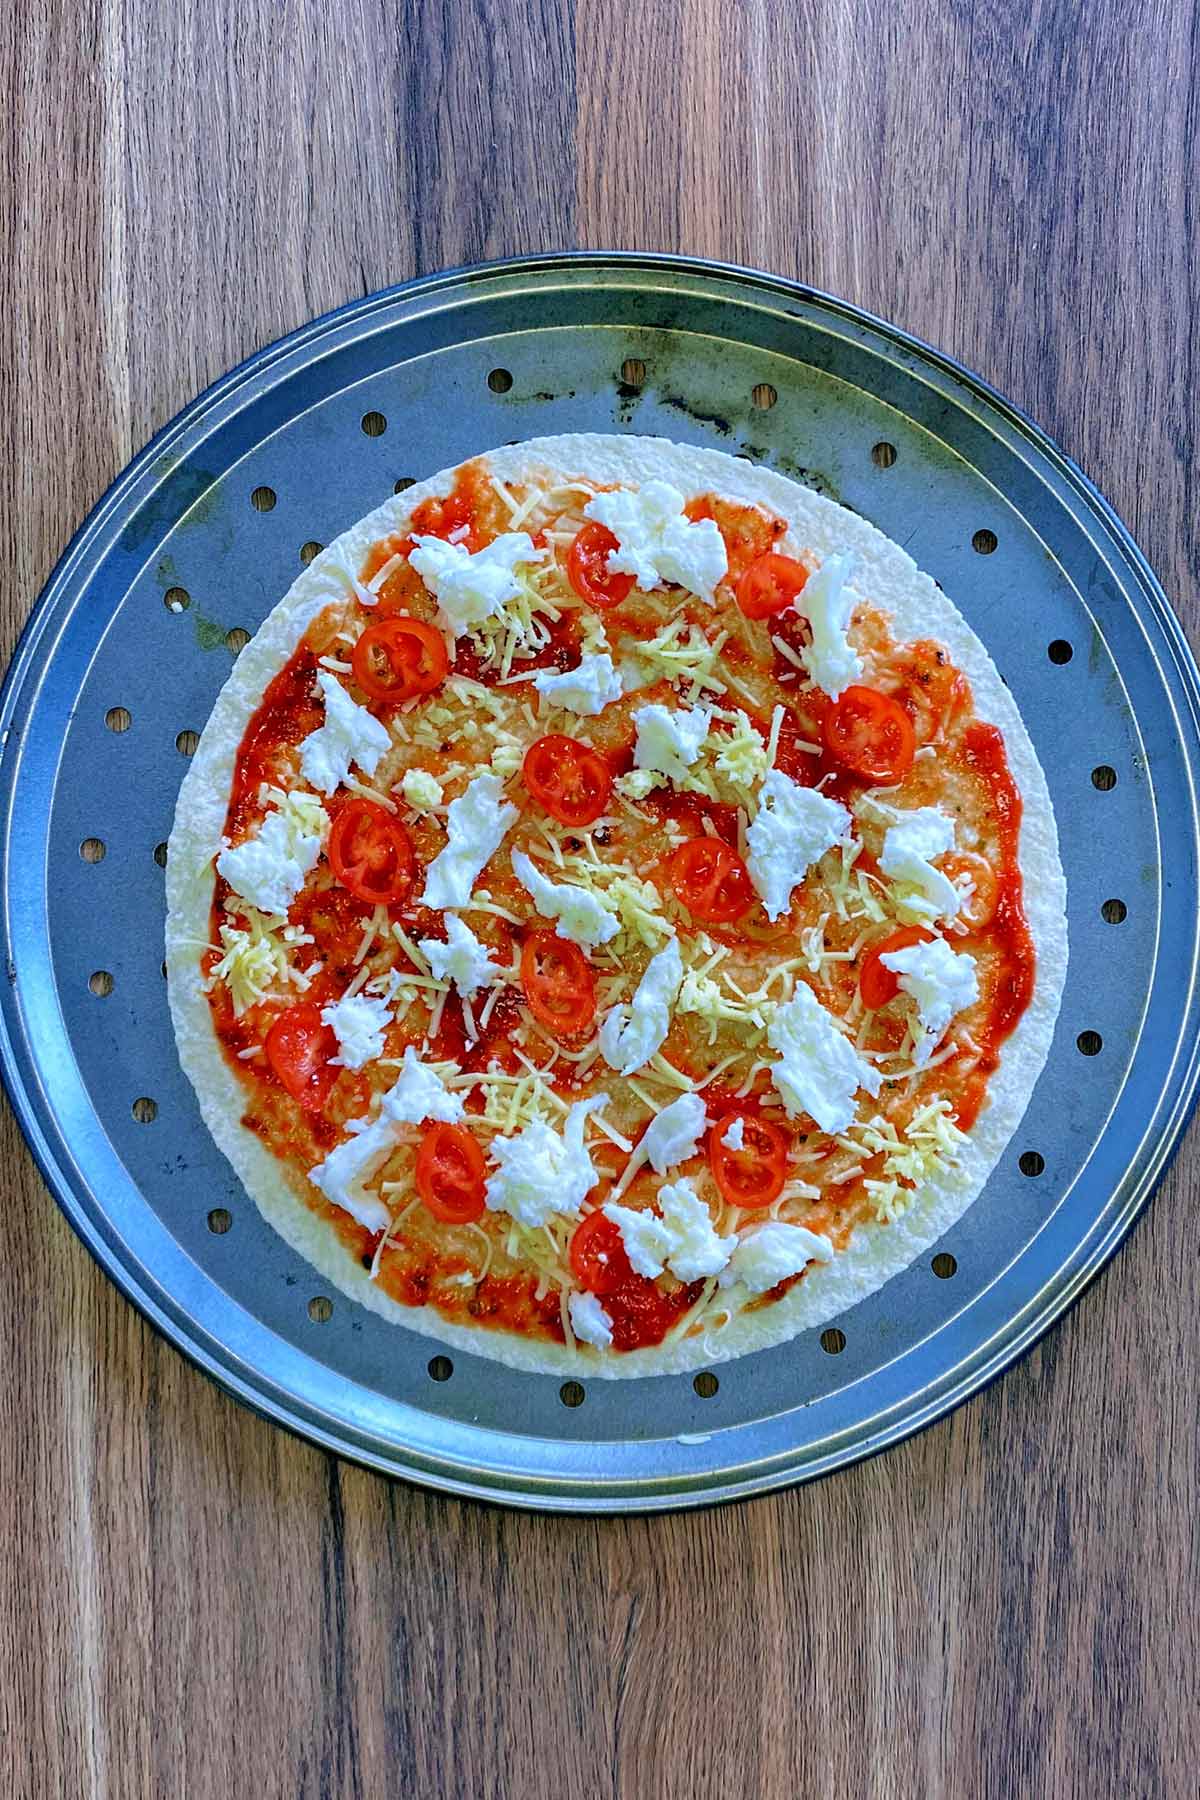 Cheese and sliced tomatoes added to the pizza.